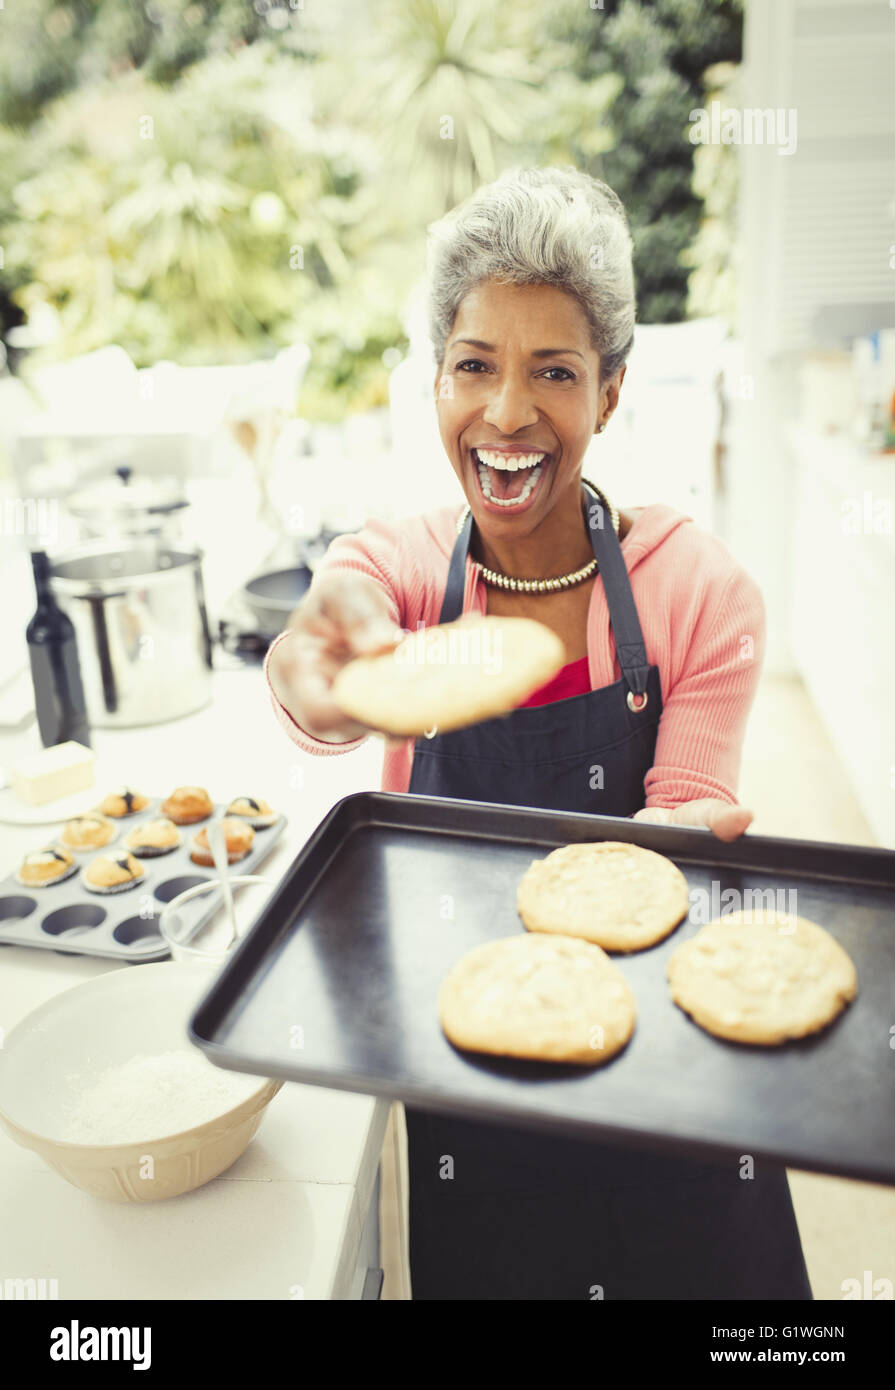 Portrait enthusiastic mature woman baking cookies in kitchen Stock Photo